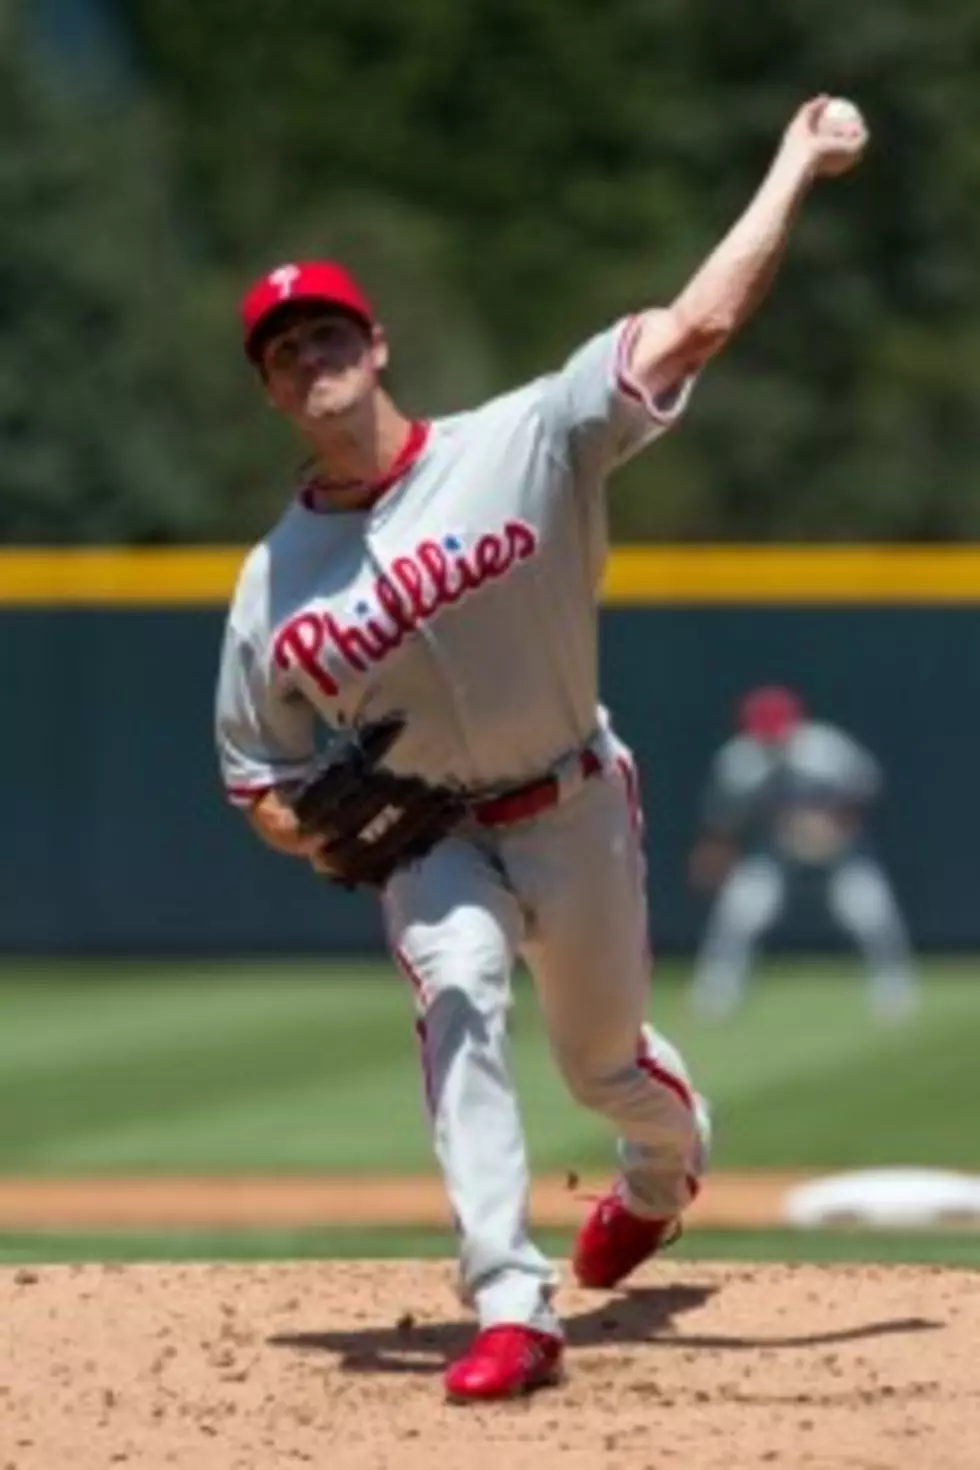 Philadelphia Phillies and Cole Hamels Agree to a 6-Year, $144 Million Deal